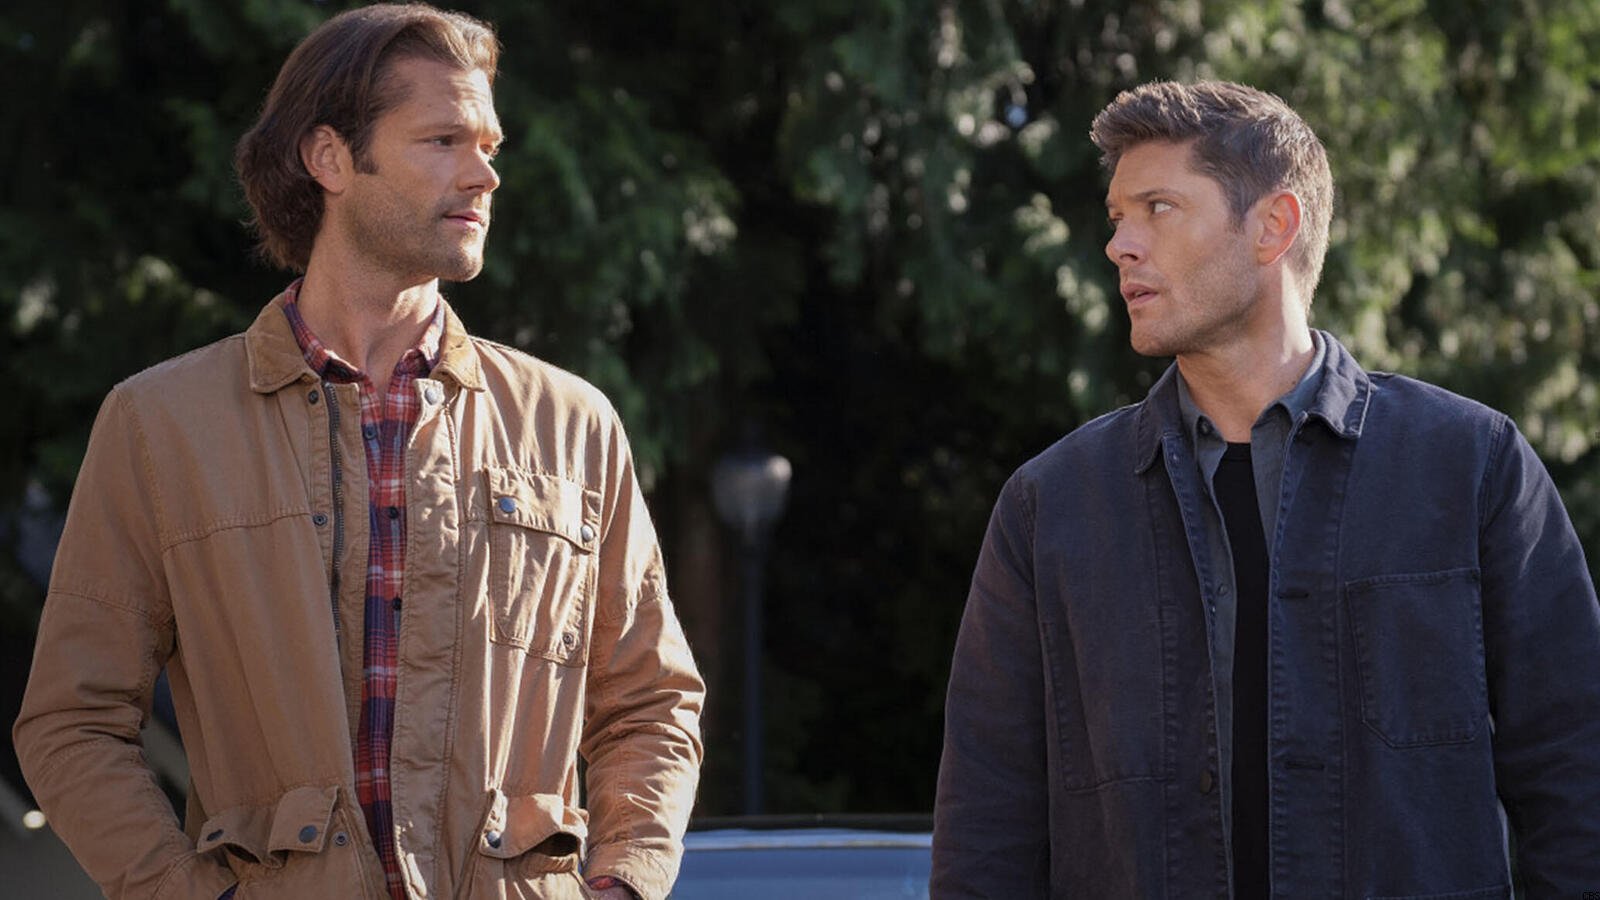 The Best Supernatural Shows on Netflix, HBO Max, Amazon, Hulu, and More